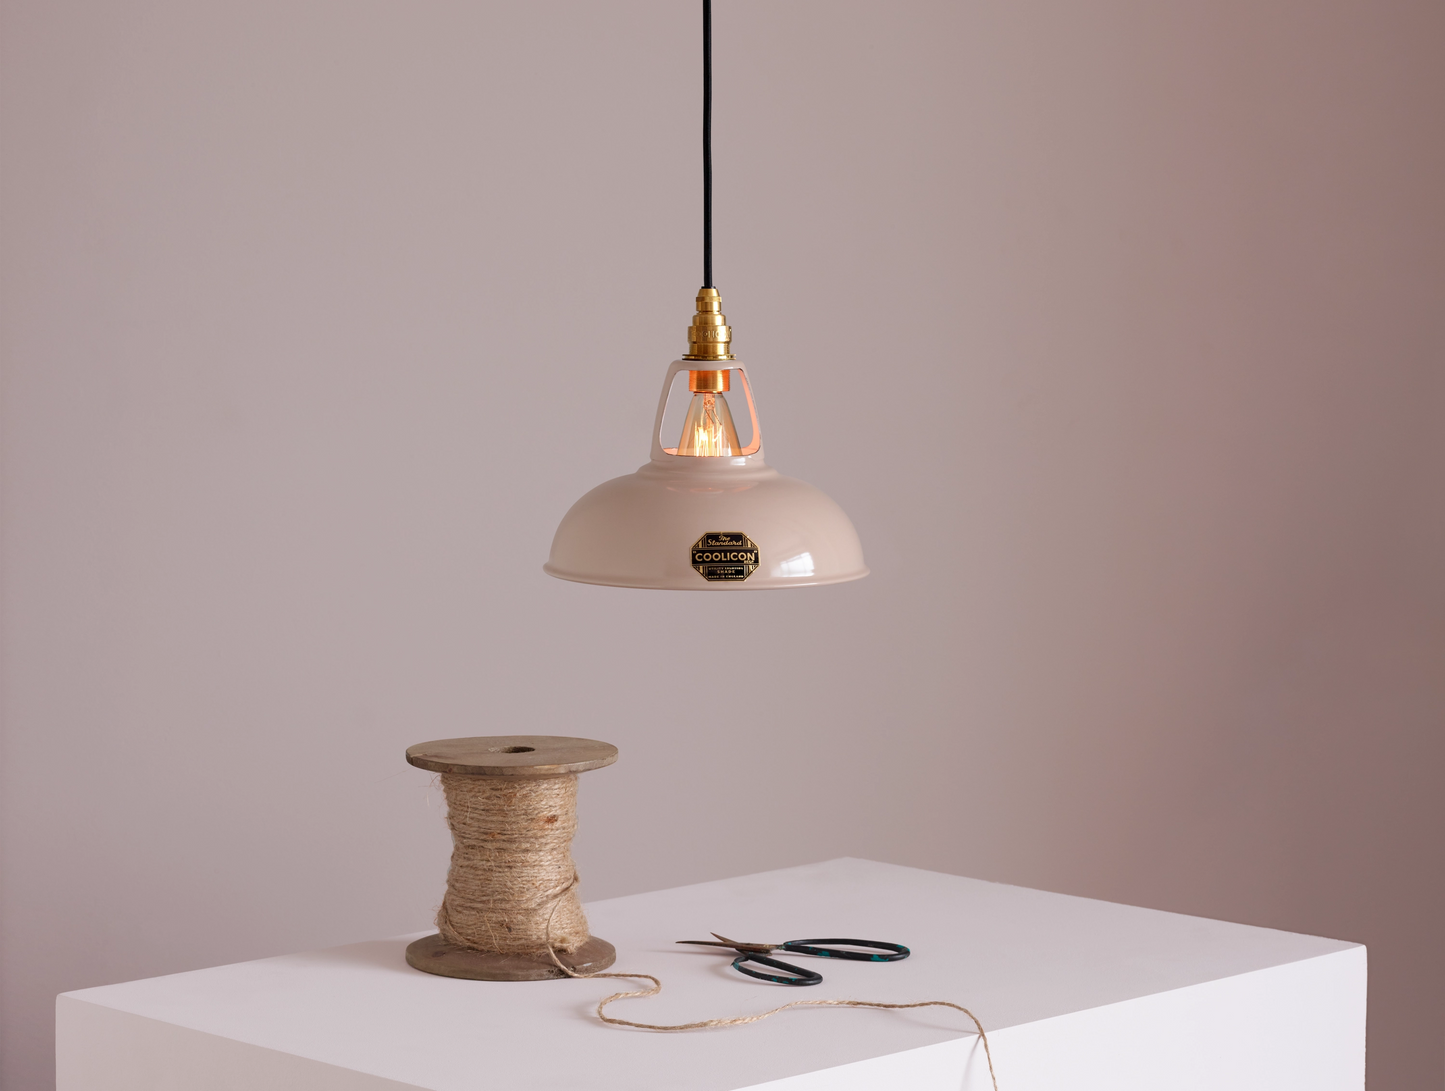 A Coolicon Latte Brown lampshade with a Signature Brass pendant set hanging above a plinth with a bobbin of twine and a pair of scissors